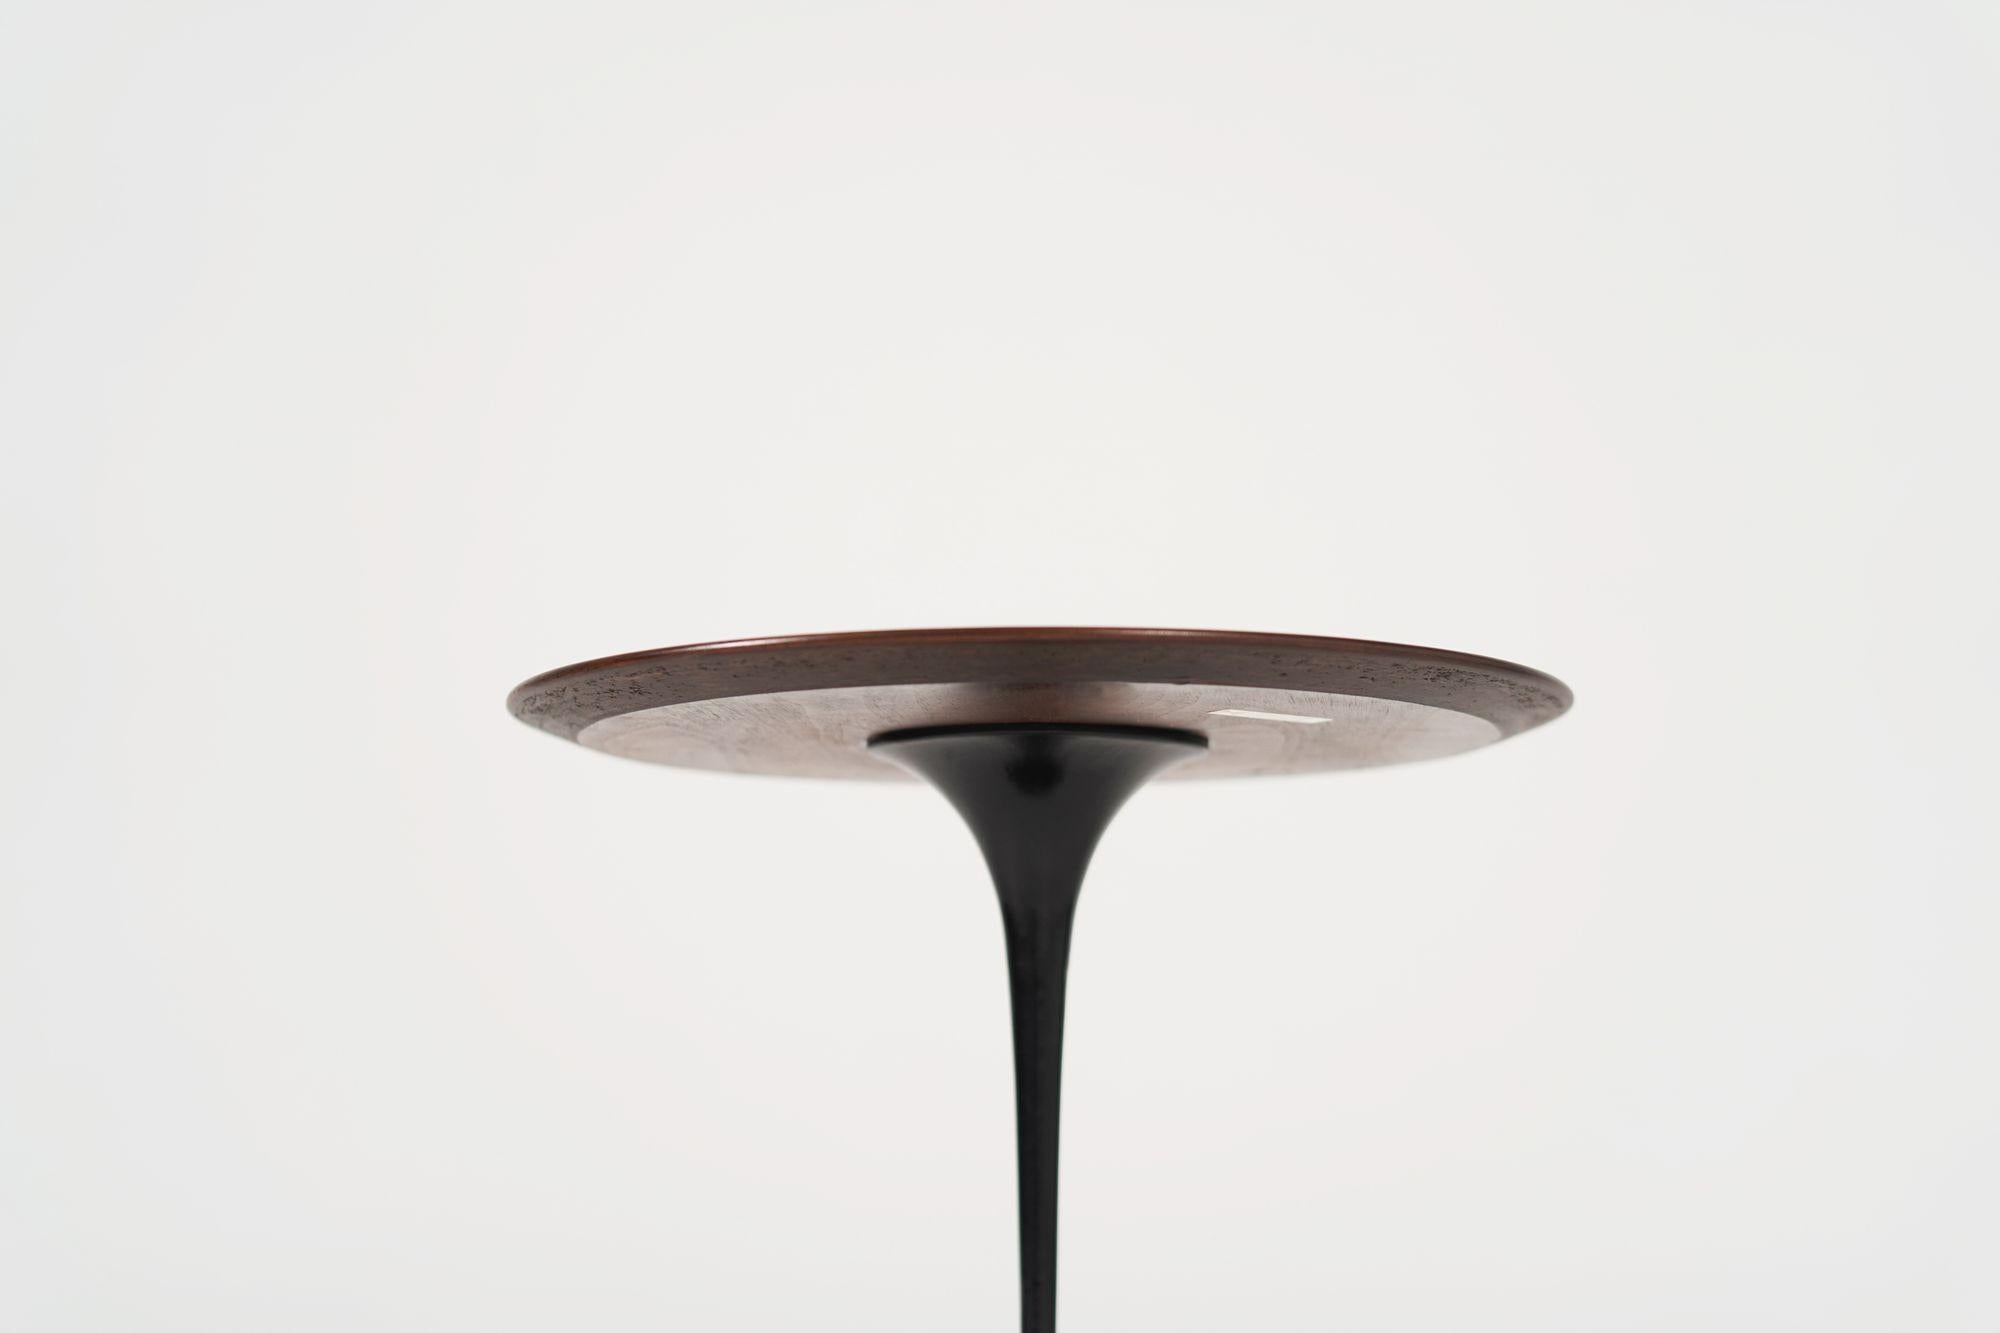 20th Century Eero Saarinen for Knoll Tulip Occasional Table, circa 1960s For Sale